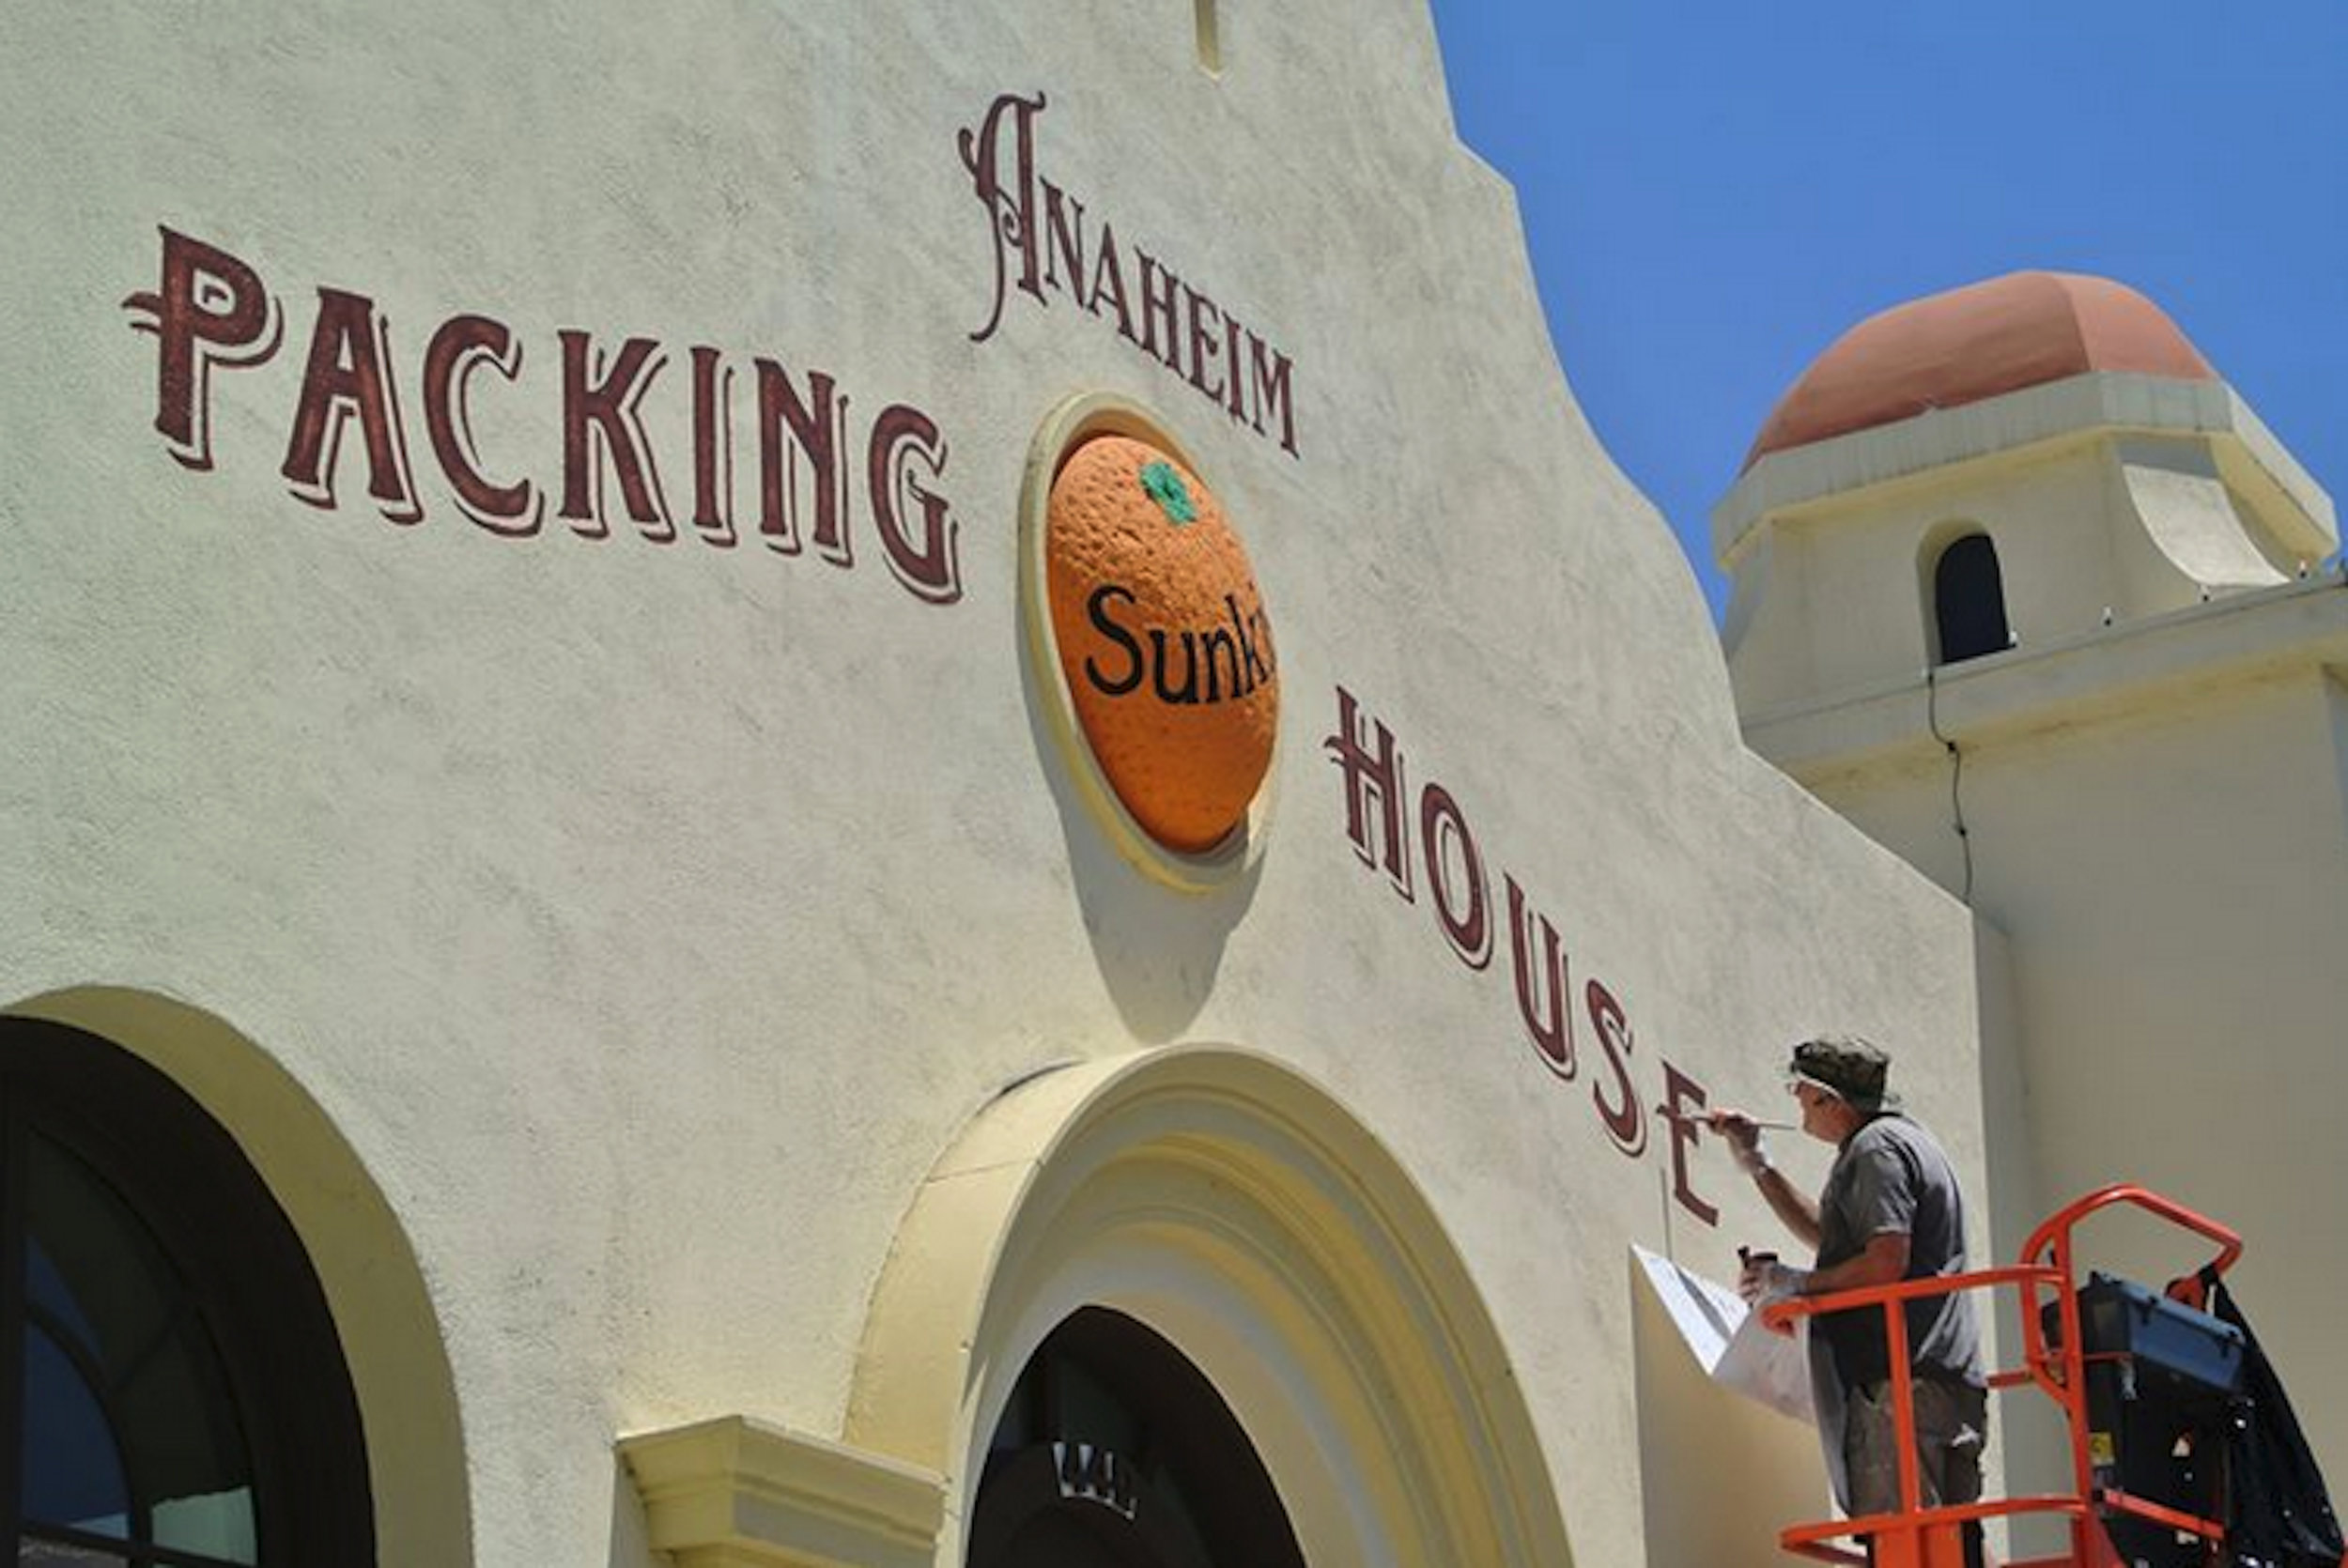 Anaheim Packing House hand lettered main sign - sign painter at work